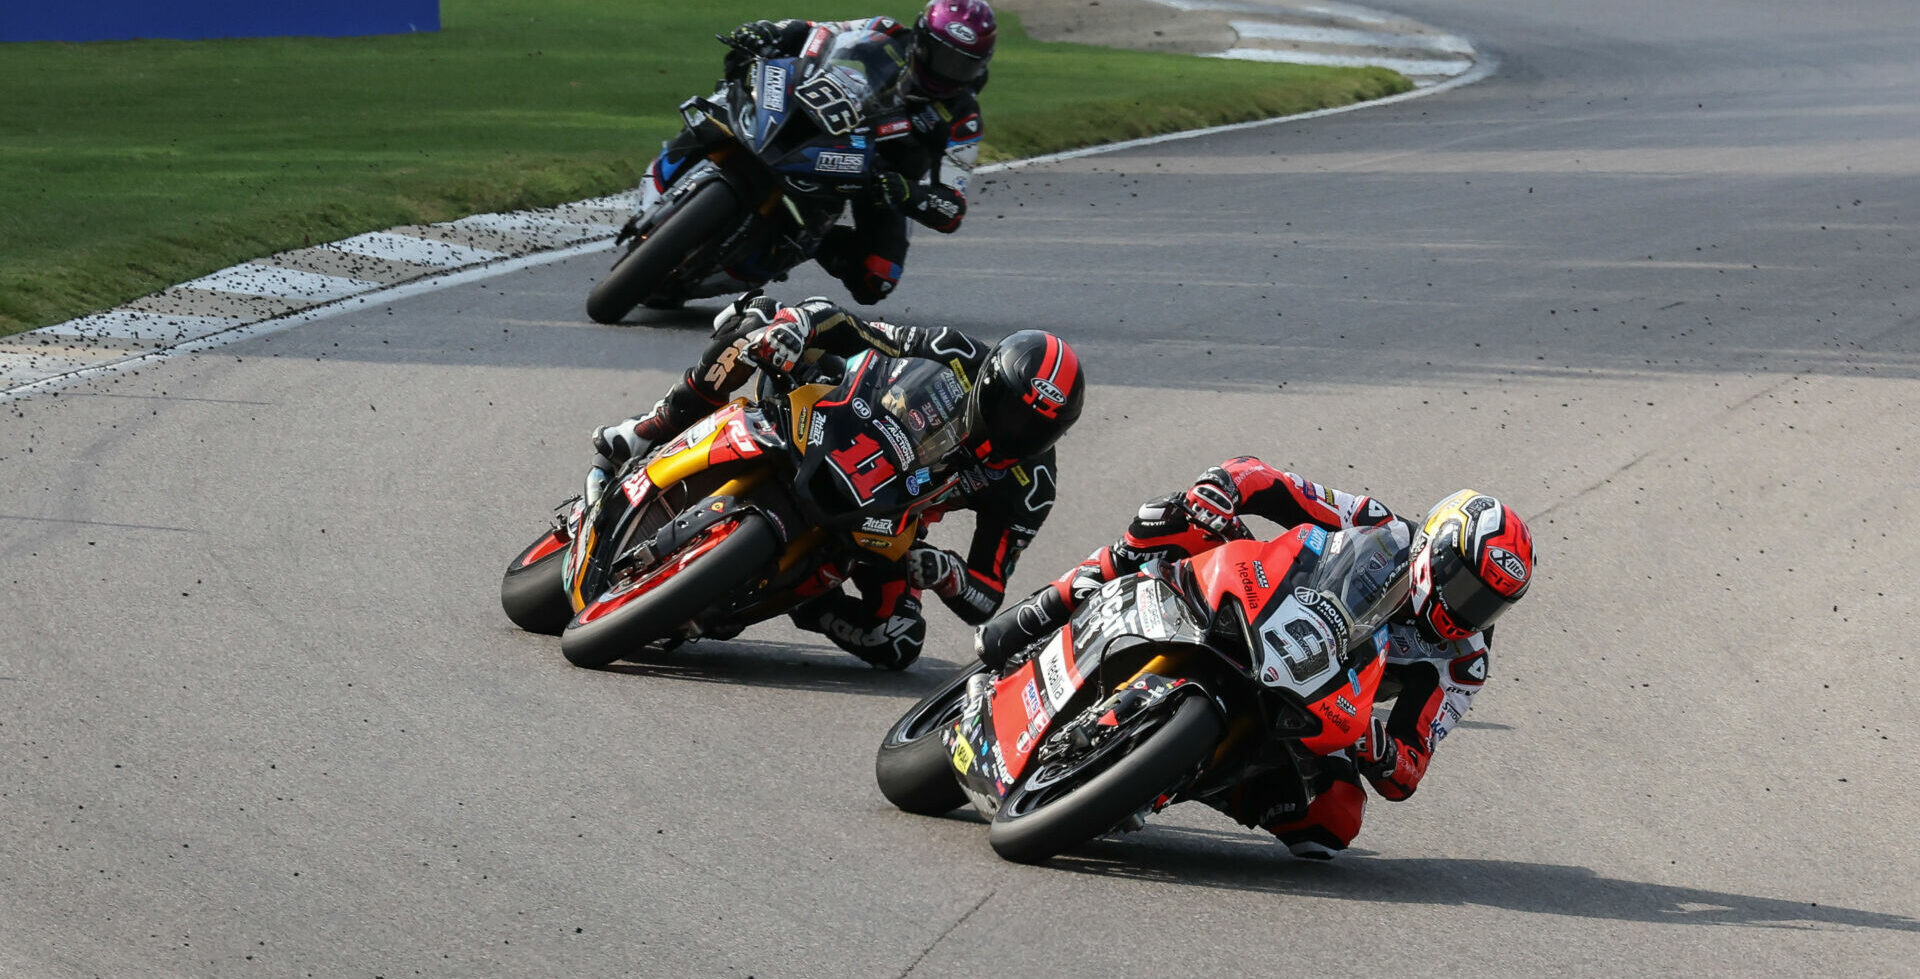 Danilo Petrucci (9) leads Mathew Scholtz (11) and PJ Jacobsen (66) in MotoAmerica Medallia Superbike Race Two at Barber Motorsports Park. Photo by Brian J. Nelson, courtesy Westby Racing.